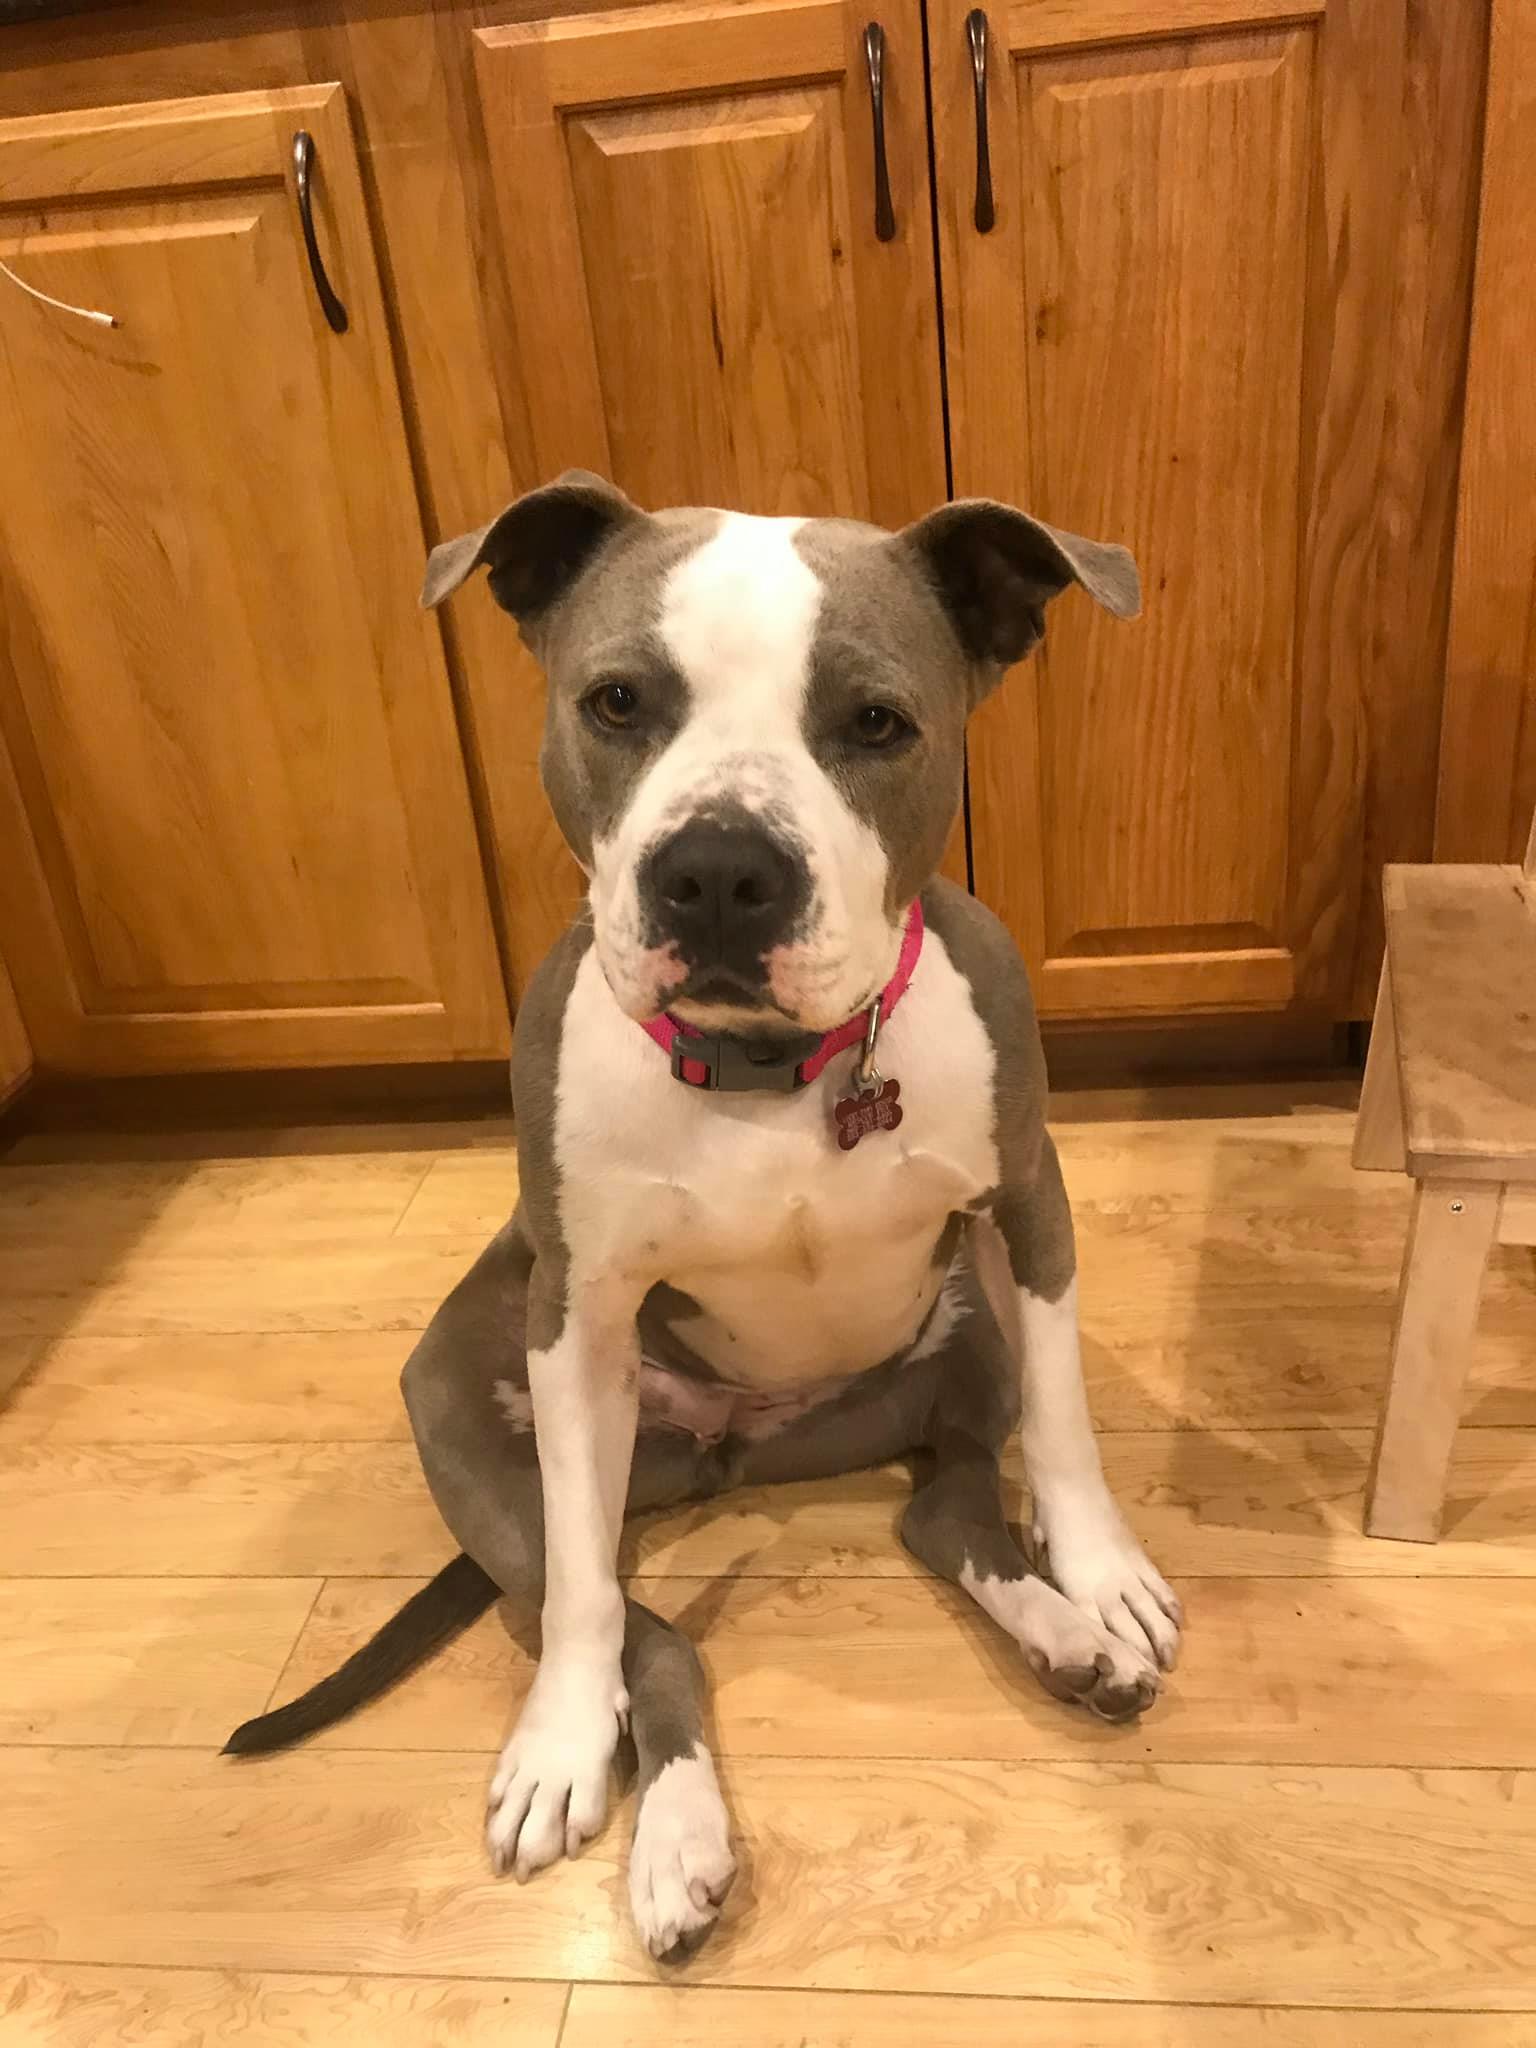 ROXY IS AVAILABLE FOR ADOPTION!!